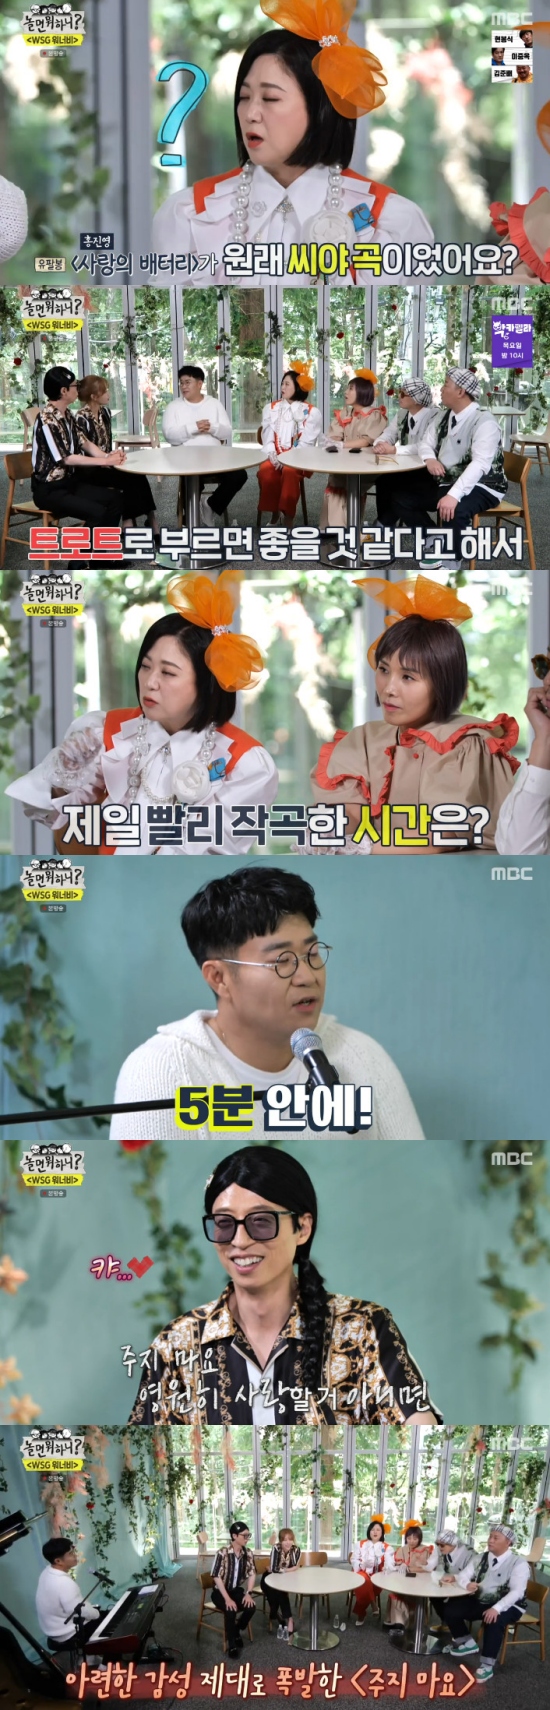 Composer Cho Yeong-su mentioned Copyright freeMBC Hangout with Yoo broadcast on the 11th, WSG Wannabe featured in the special feature, Cho Yeong-su joined the scene was broadcast.On this day, Shin Bong-sun asked, Can I ask what the first song of the Copyright free is? And Cho Yeong-su said, It has been a long time since the song came out and I think these songs are the first in SG Wannabe My Love or Lara last year.Cho Yeong-su said, The song that has been chasing most recently is loved by Lim Young-woongs song I believe only now.I think we will pursue it soon, he said.Yoo Jae-Suk expected, Did you see 12 members selected? And Cho Yeong-su said, Its so coveted and there is no ups and downs of singing ability.There is no difference, and it is all leveled up, so anyone can be the main vocalist. Cho Yeong-su said: The best person was the one who was surprised: Jung Ji-so. He sounded so good.Park Jin-joo knew he was good at singing, but he was surprised when he sang Ben.I think I will digest the most trendy music well, he said, revealing his fanship about Jung Soo, Park Jin-joo and Sol.Yoo Jae-Suk asked, The battery of love was a SeeYa song, and Cho Yeong-su said, Before Hong Jin-young debut, it was a company like SeeYa.I have a lot of affection for SeeYa, so when a concept song comes out, I gave SeeYa. Hong Jin-young said that he would like to hear the song and come out as a trot. Furthermore, Cho Yeong-su attracted attention by introducing the ballad version of Battery of Love.Kim Sook wondered, How many minutes did you write the first quick song? And Cho Yeong-su said, I think the ballad songs were made in five minutes.I didnt just write it in five minutes, but I was worried about what song I would write before, and when I sat in front of the keyboard, I came out (quickly).I wrote it at once in the case of Lee Ki-chans beauty or Lee Seung-chuls Nobody else.In addition, Cho Yeong-su released the Do not Give Me and Love I, which he envisioned thinking about WSG Wannabe, and the judges said they would buy songs from each other.Photo = MBC Broadcasting Screen